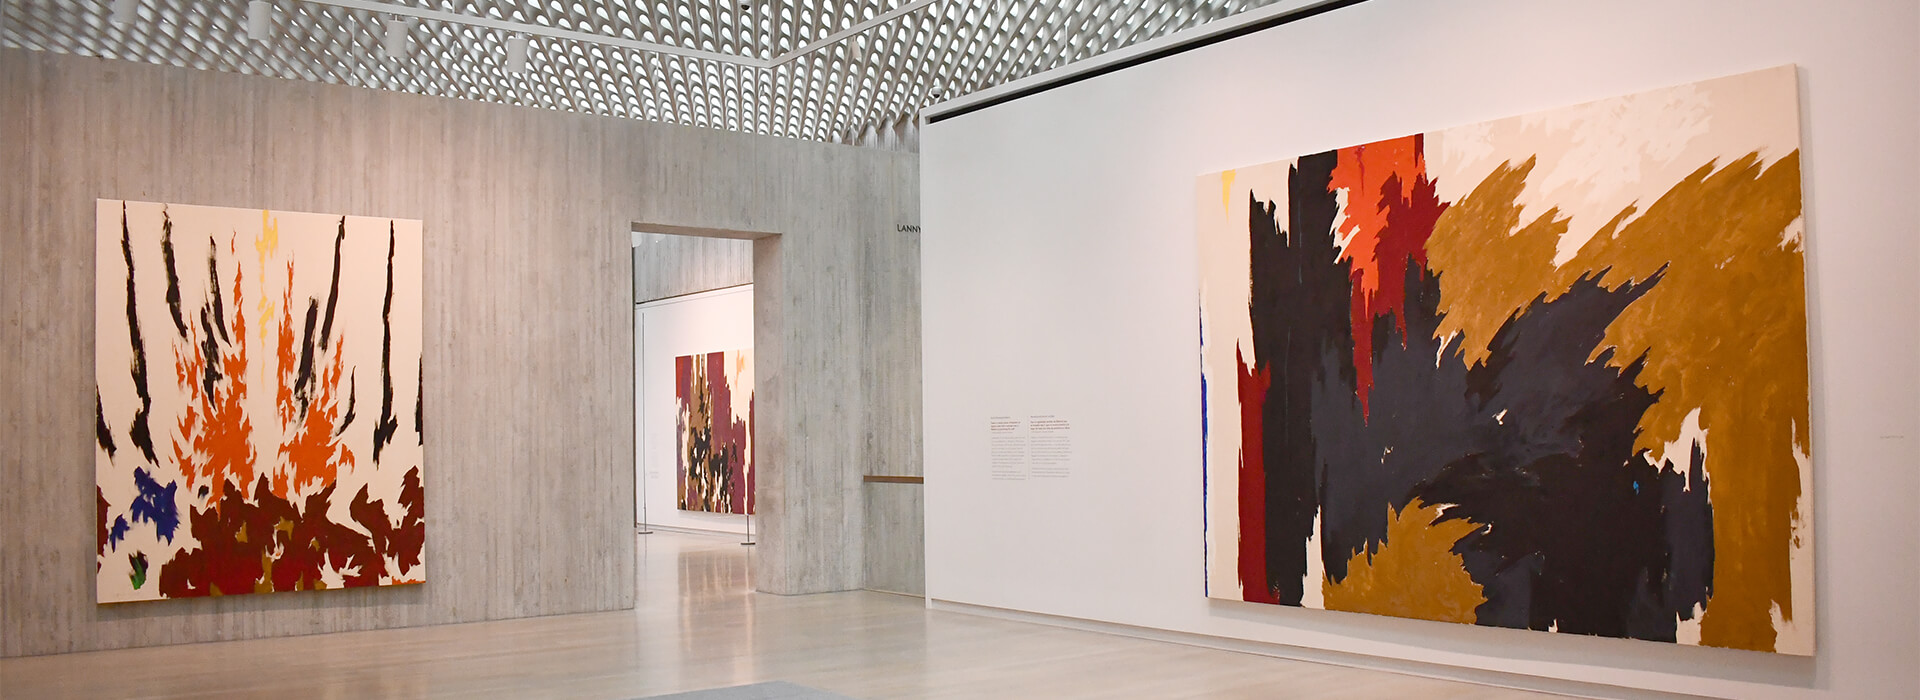 Gallery at the Clyfford Still Museum with large colorful abstract paintings on the walls